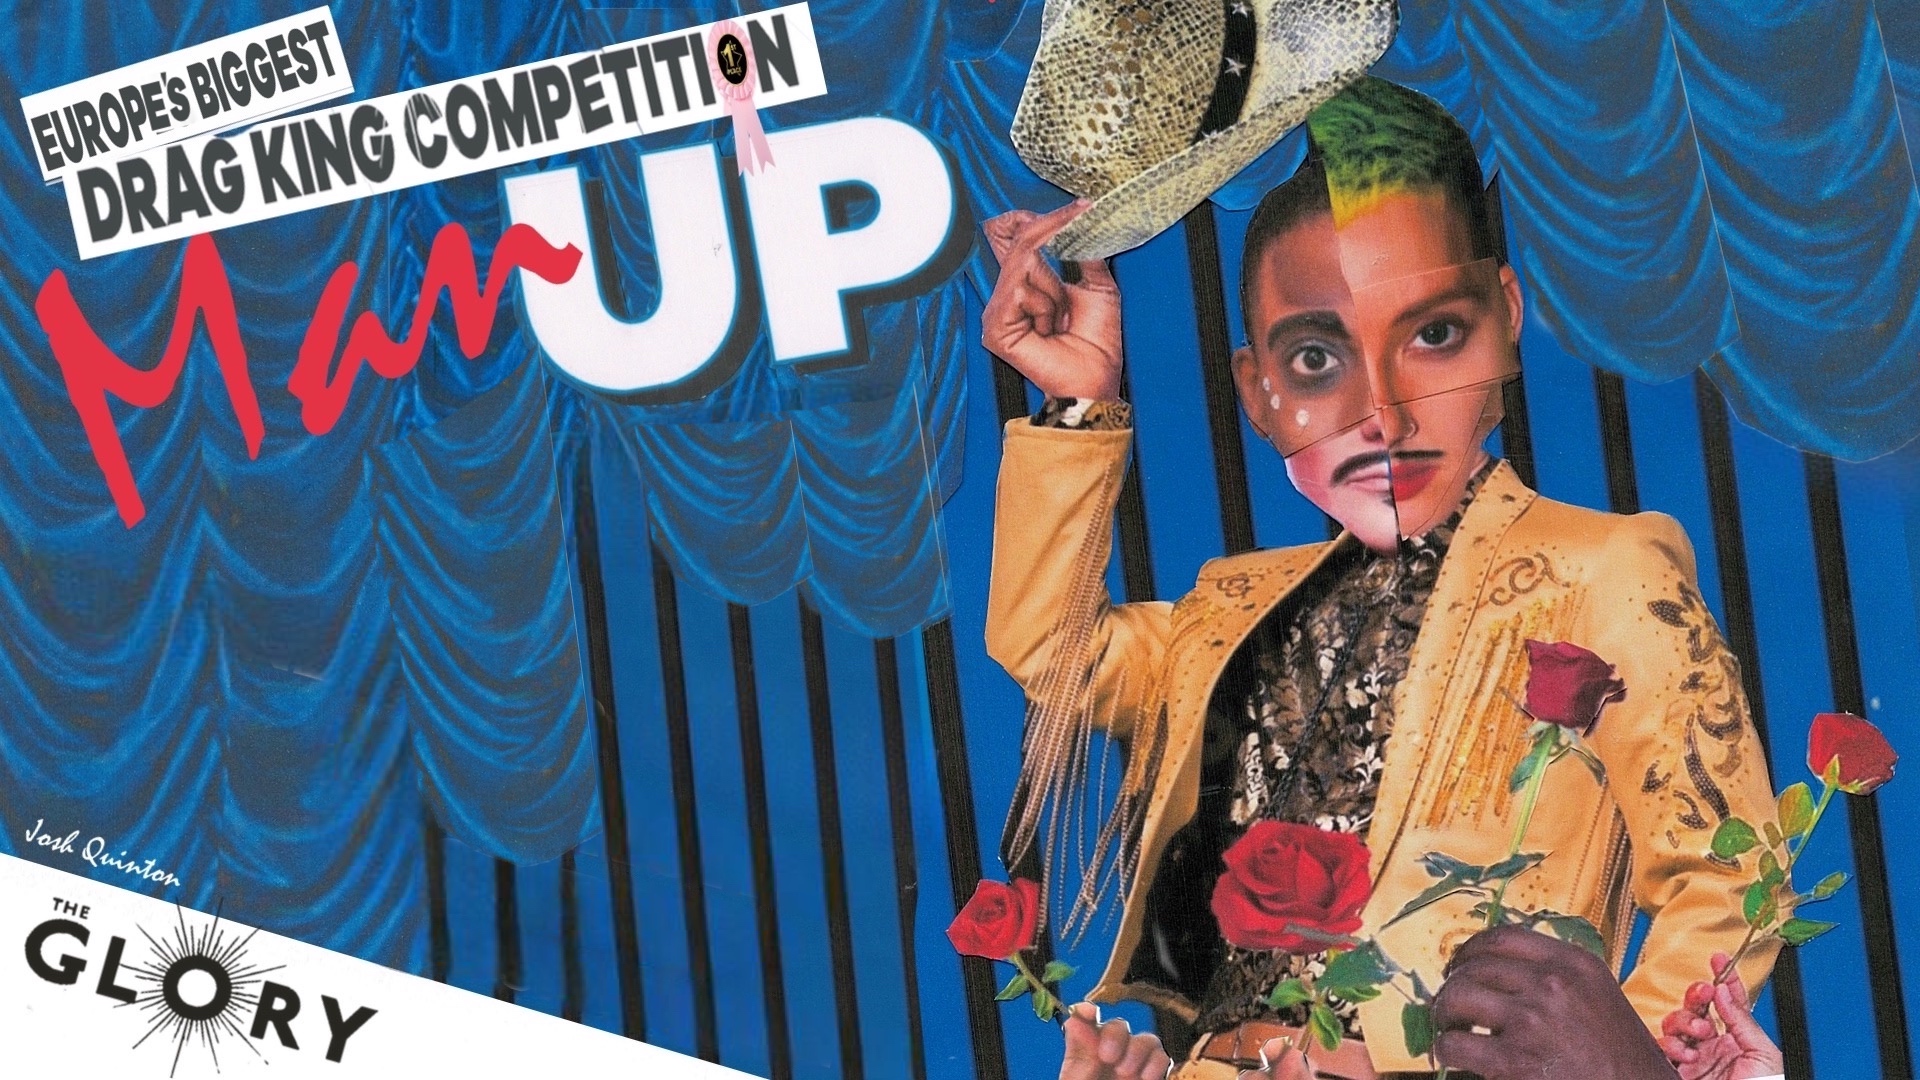 Man Up! Drag King Competition – HEAT 6